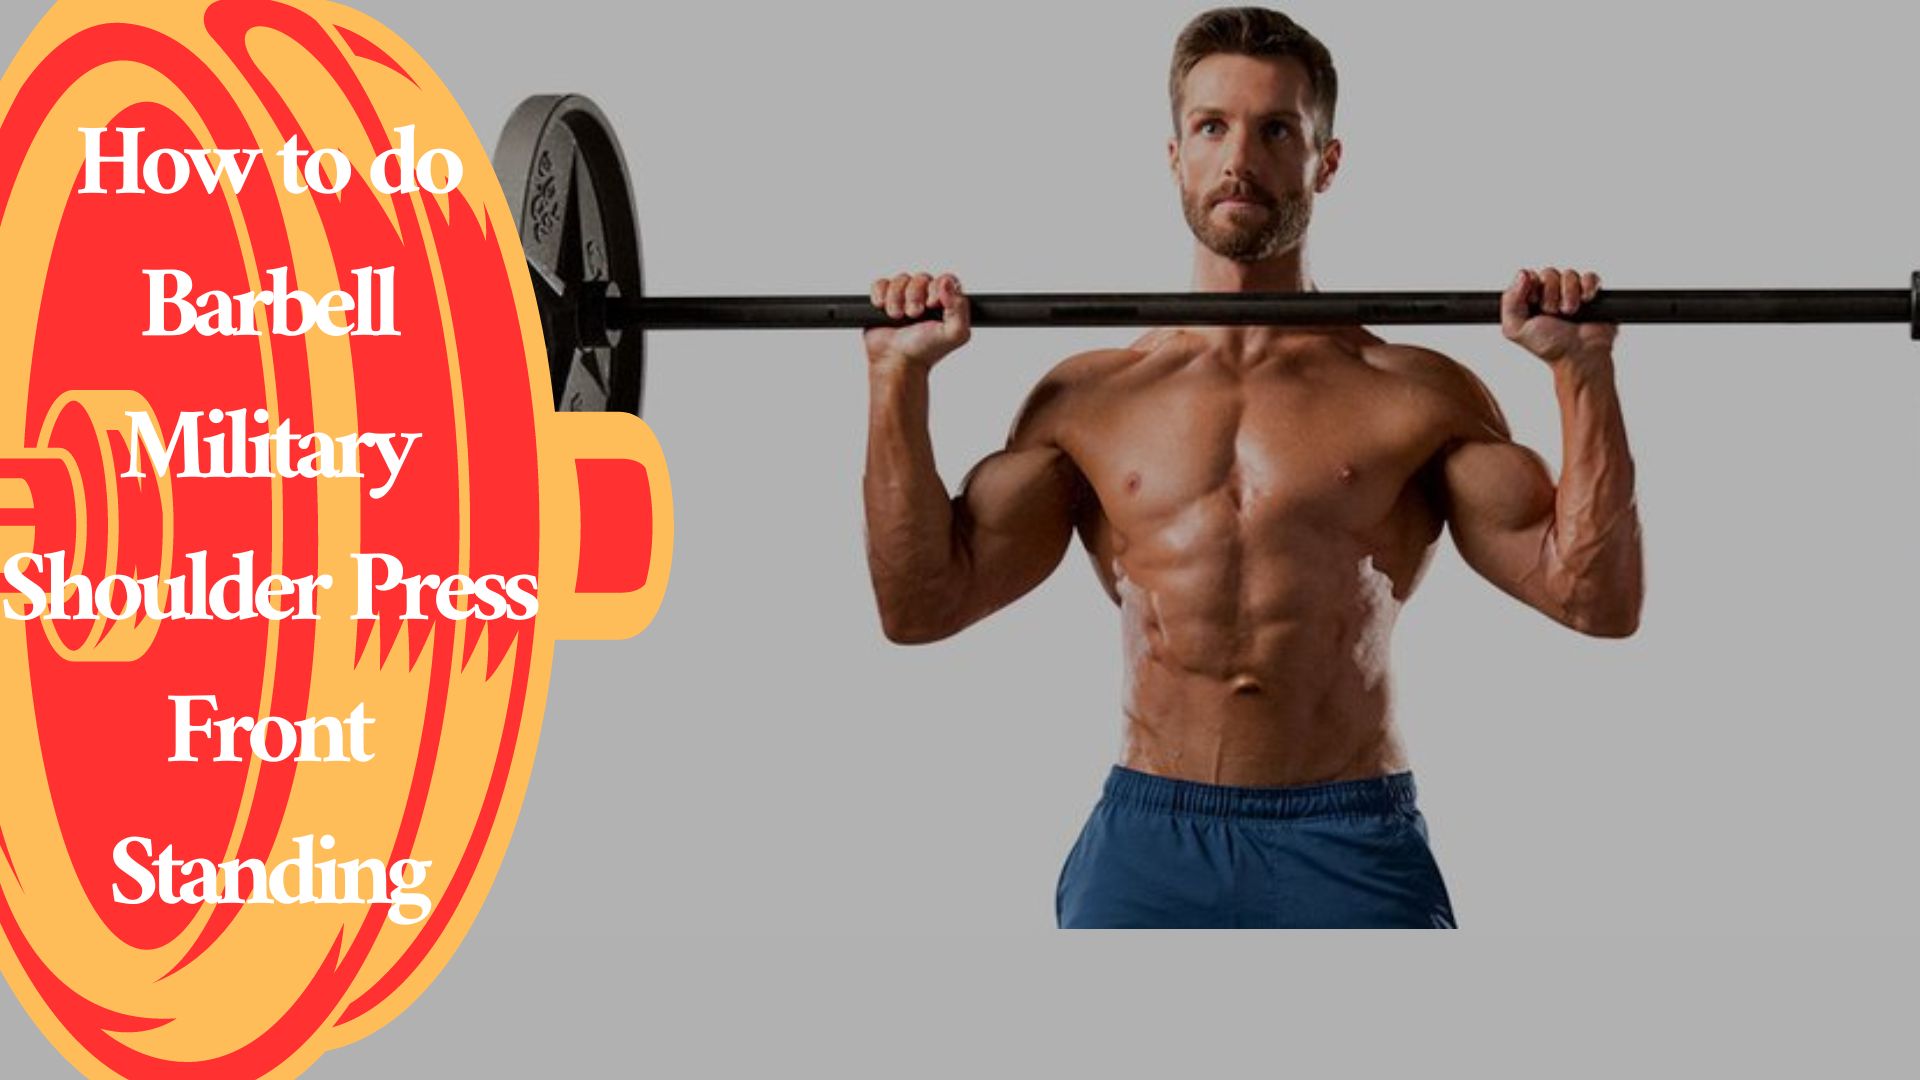 How to do Barbell Military Shoulder Press Front Standing